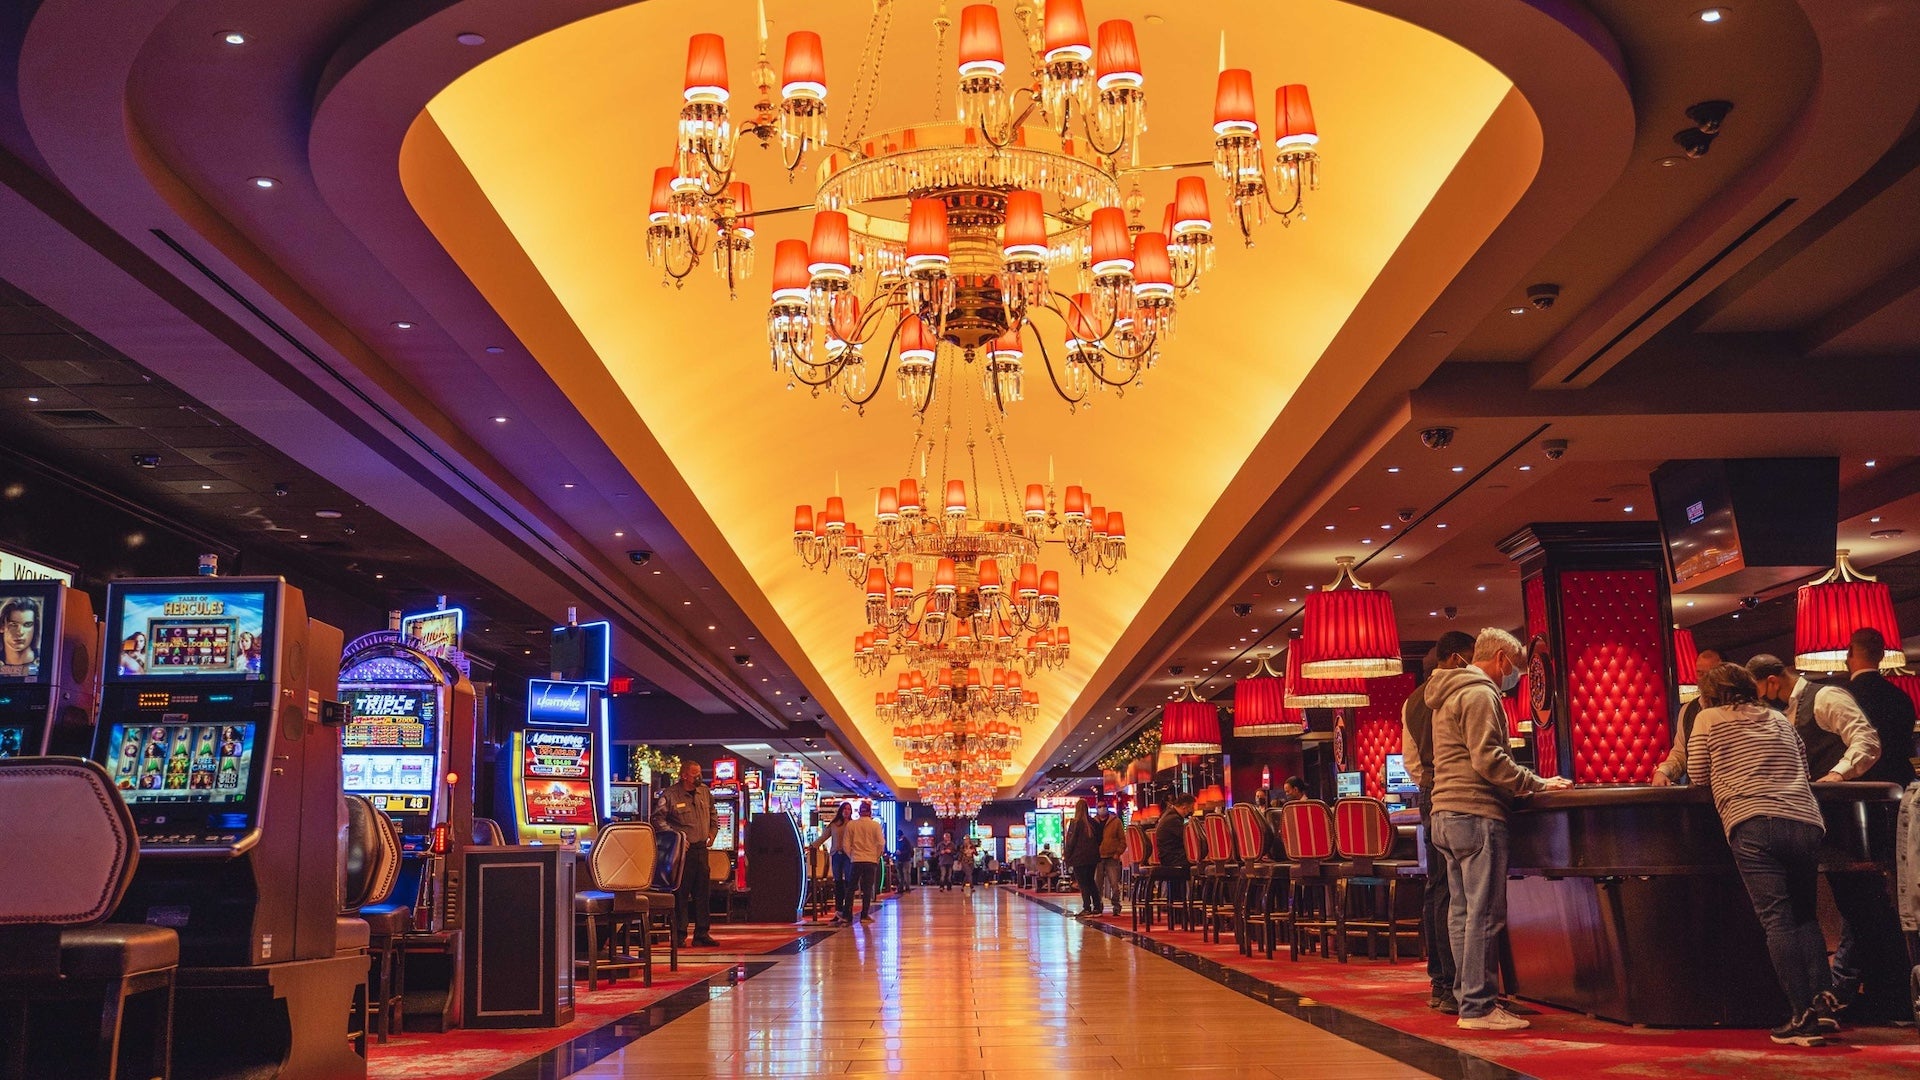 Interior shot of a casino with slot machines